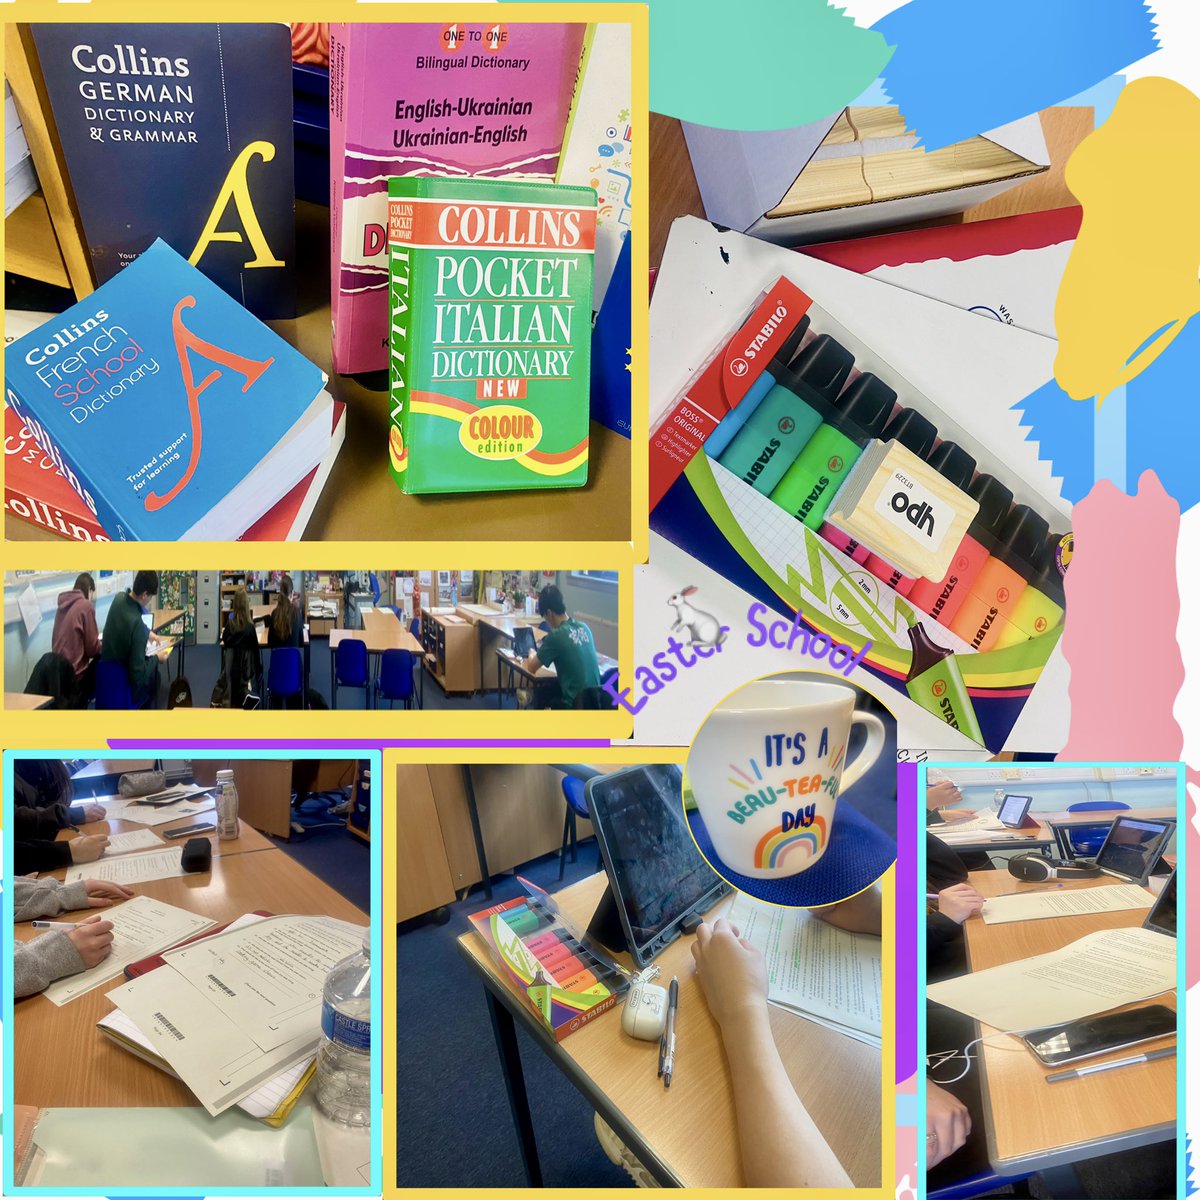 Great to see so many students today @CraigmountHS Easter School & to have activities to support study in French, German, Spanish & ESOL across levels. Best of all, it was lovely to have such enthusiastic attitudes & a happy atmosphere created by smiling, friendly students.